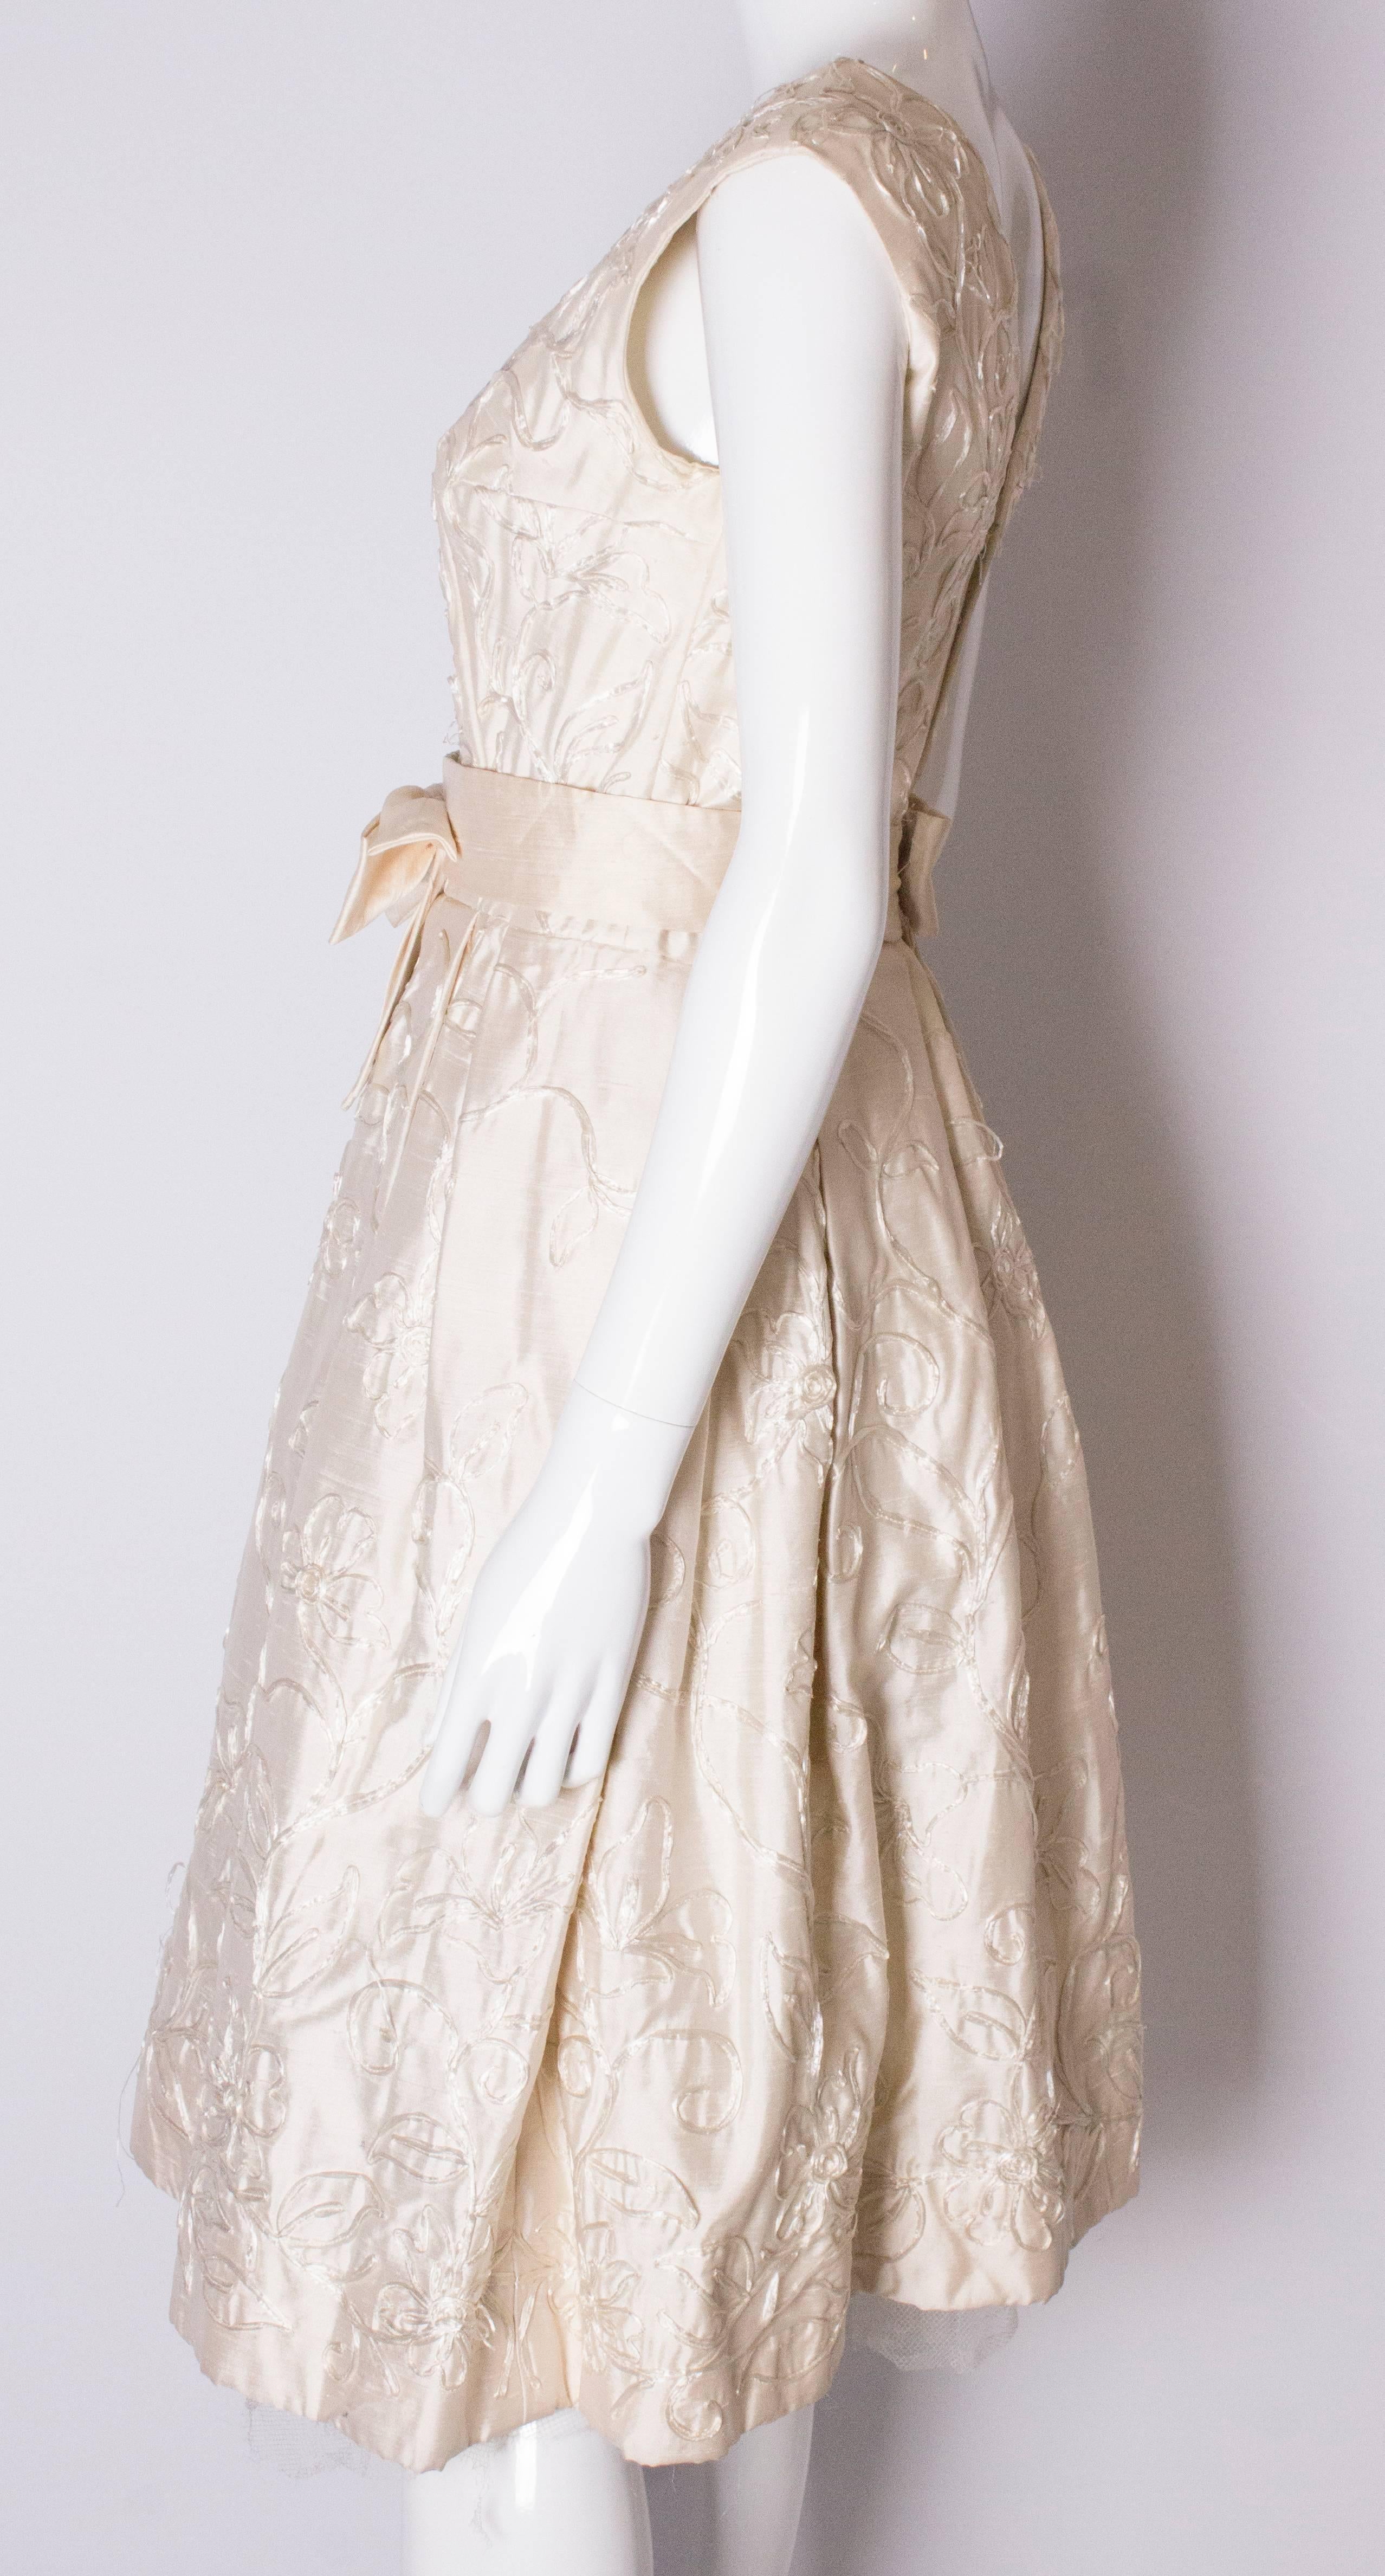 Women's A Vintage 1950s ivory cocktail bridal dress by Julian Roe for Adaire London